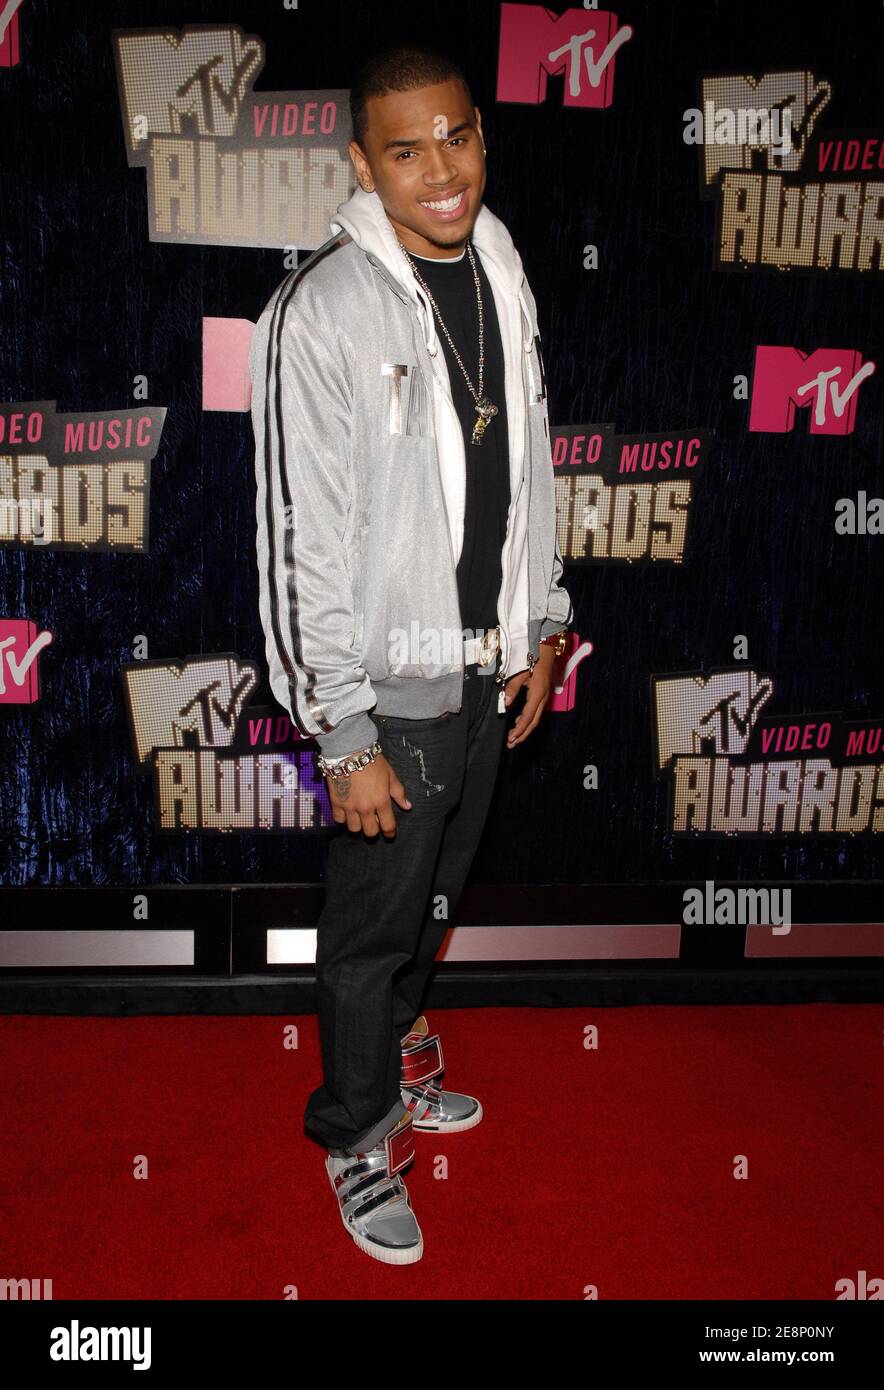 Chris Brown attends the 2007 MTV Video Music Awards held at the Palms Casino Resort in Las Vegas, NV, USA on September 9, 2007. Photo by Lionel Hahn/ABACAPRESS.COM Stock Photo